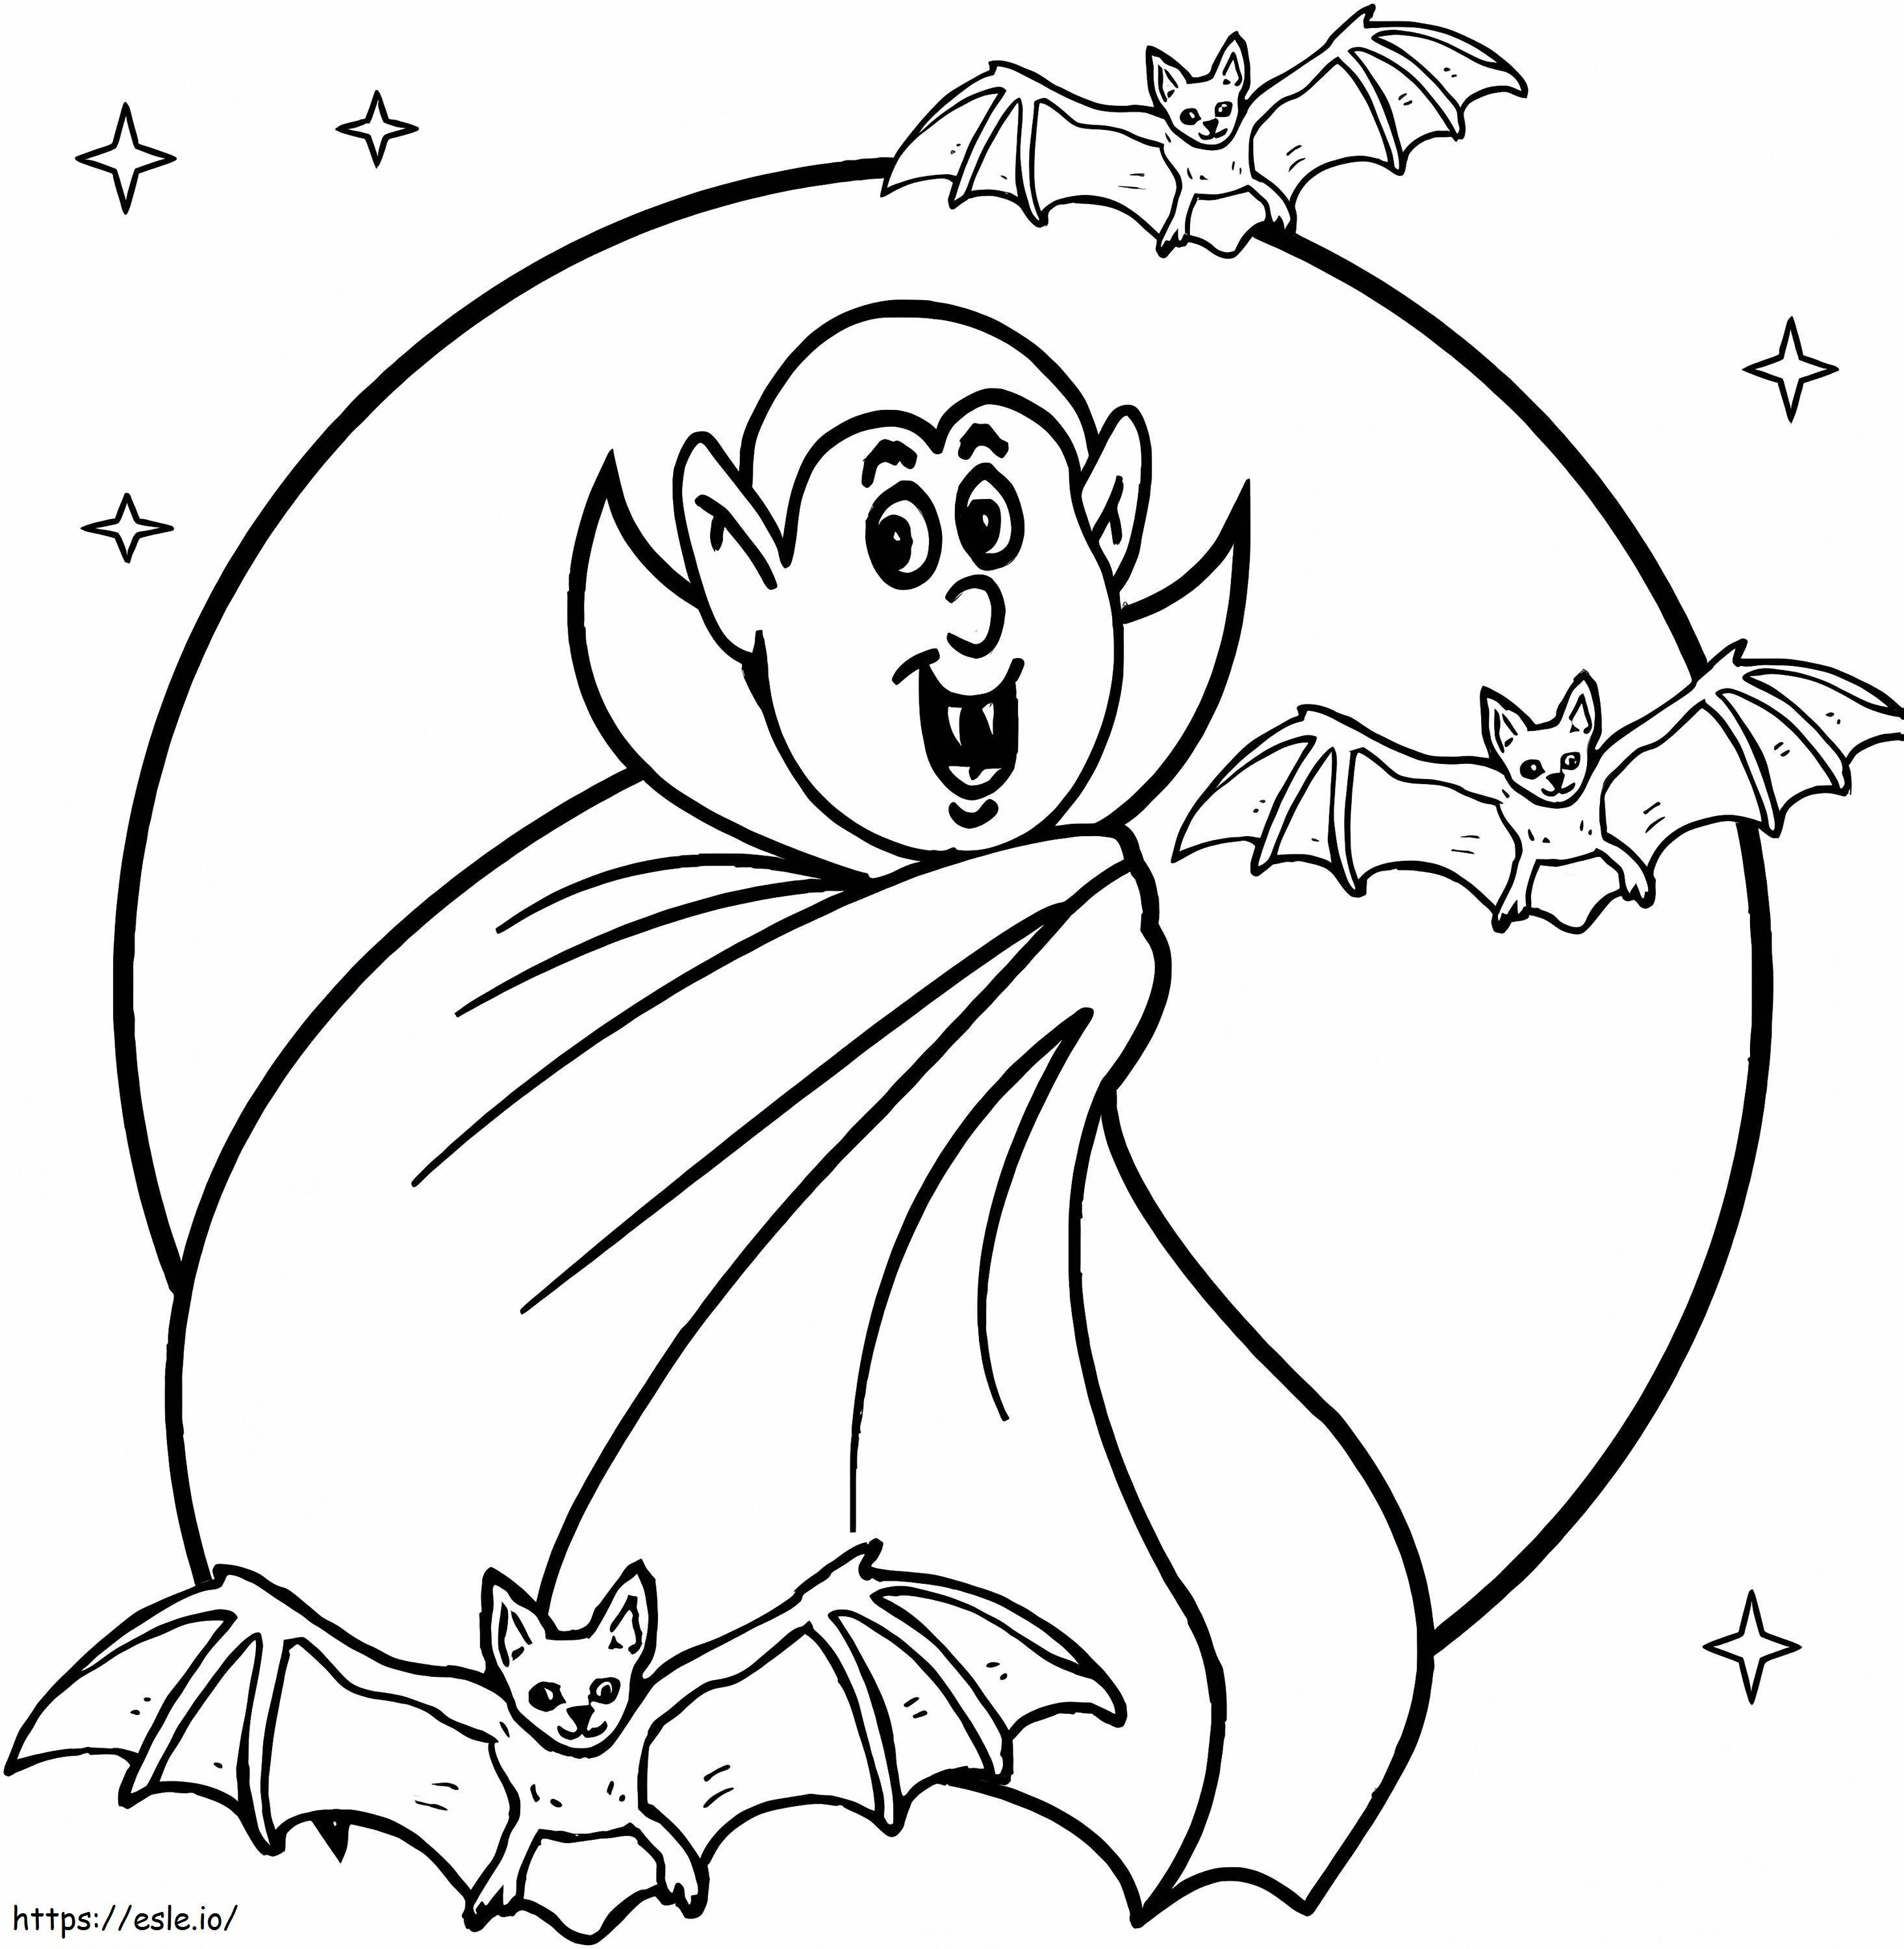 Halloween Vampire coloring page